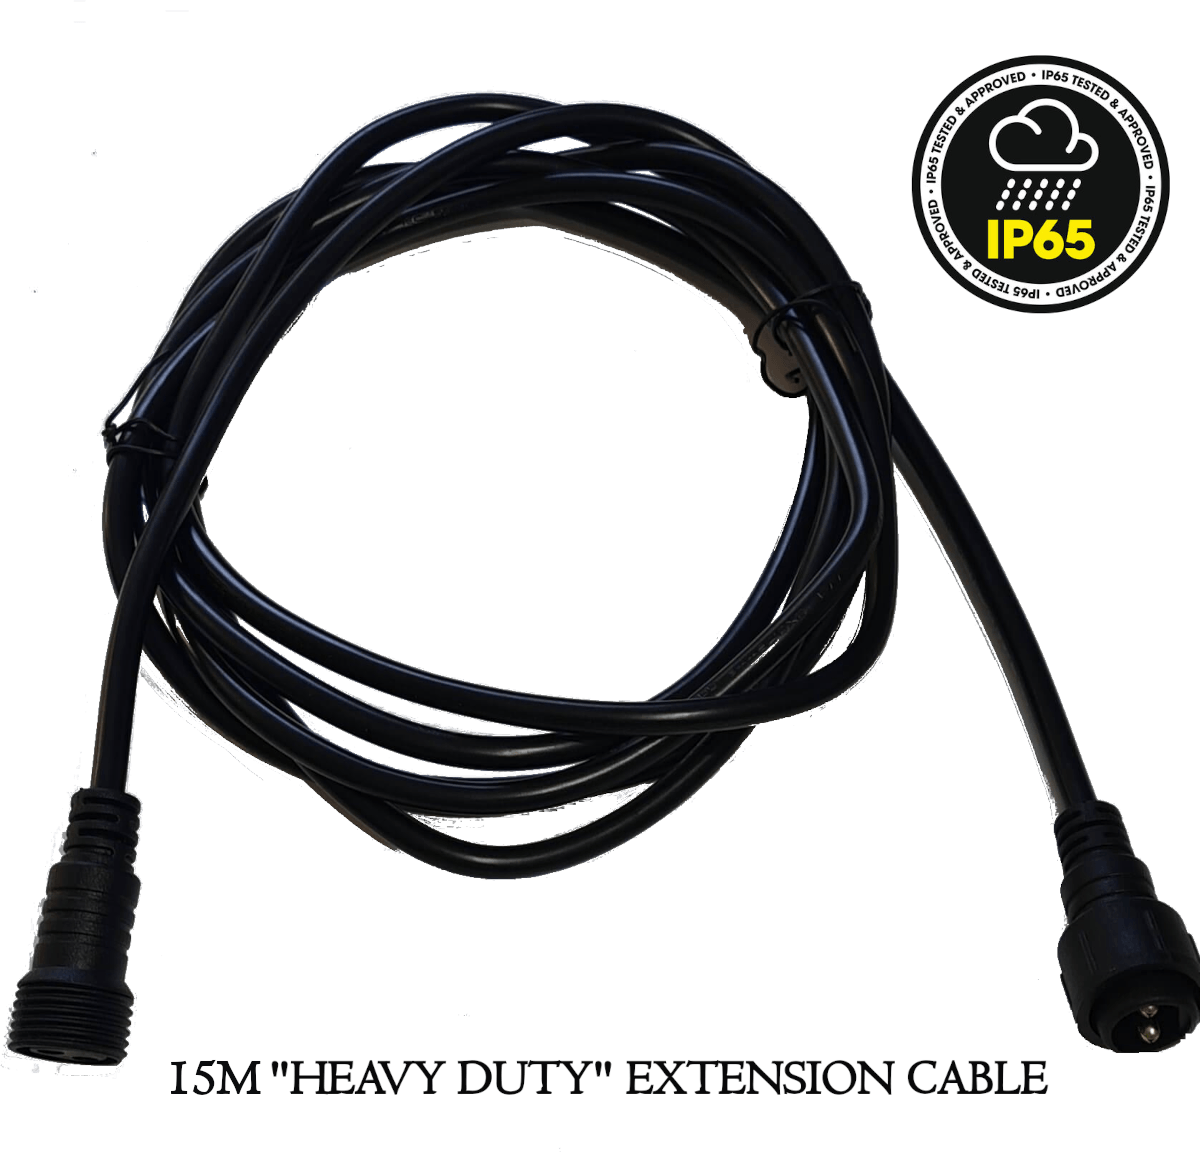 15 Metre Extension Cable For Heavy Duty Waterproof Outdoor String Lights - 15m